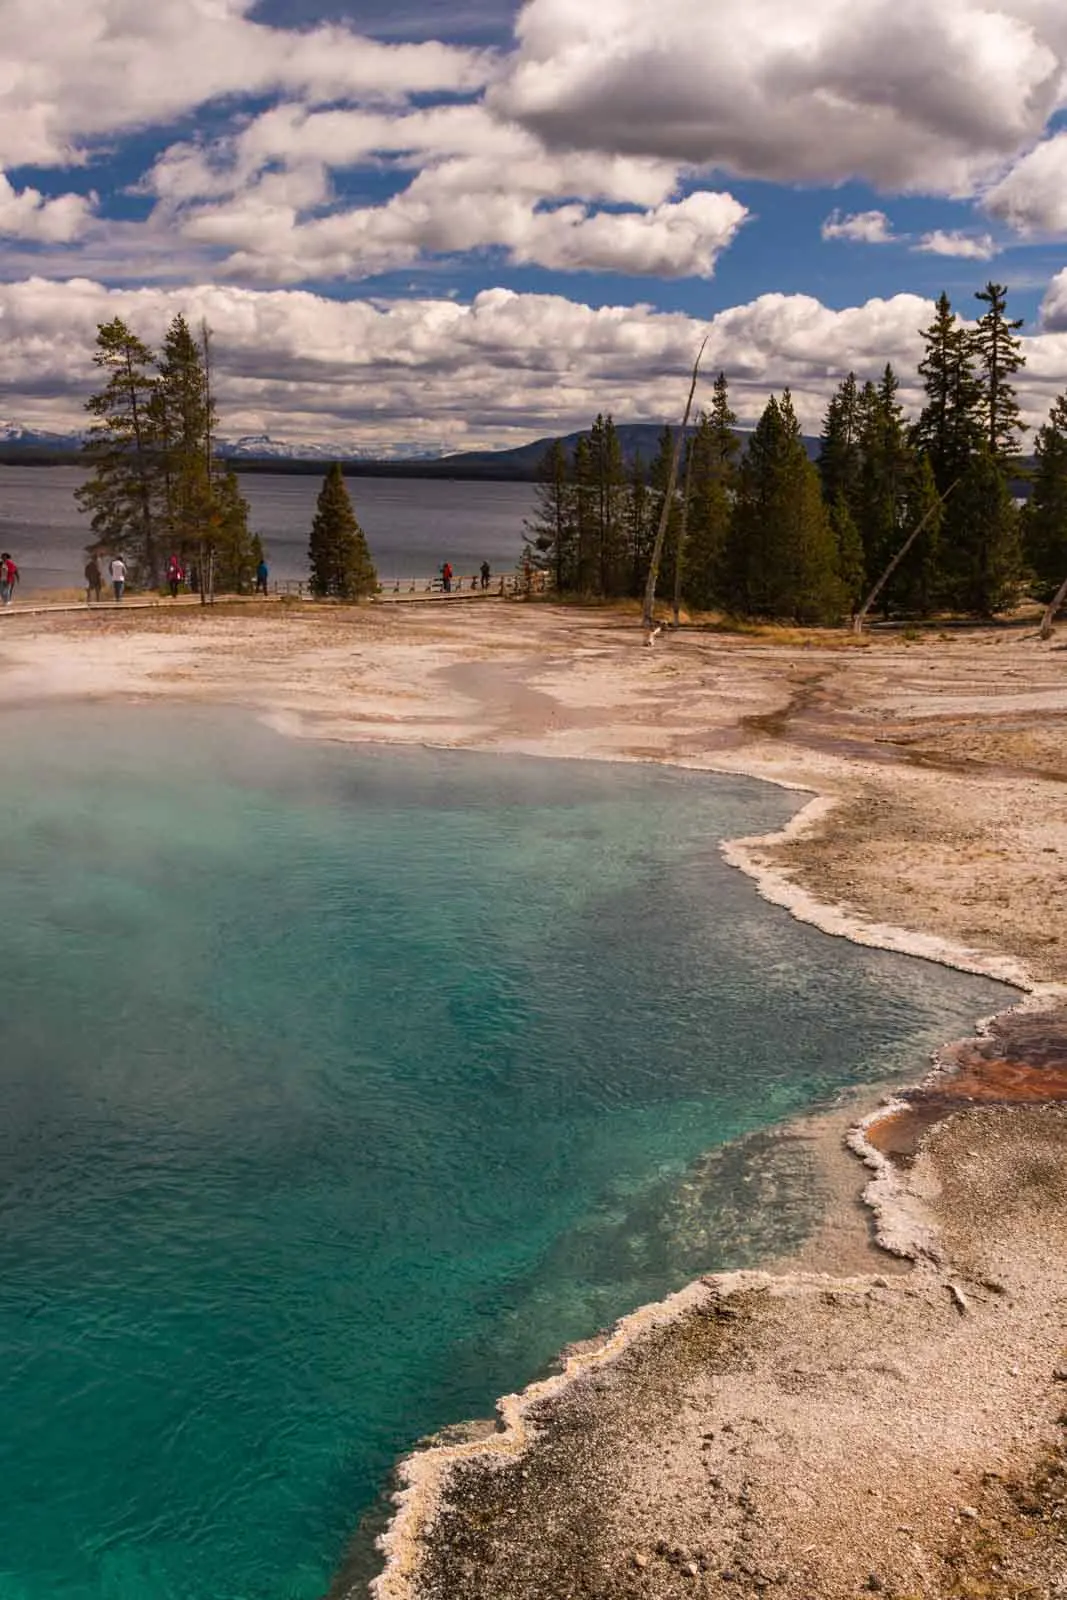 West Thumb Geyser Basin is another exciting thing to do in Yellowstone